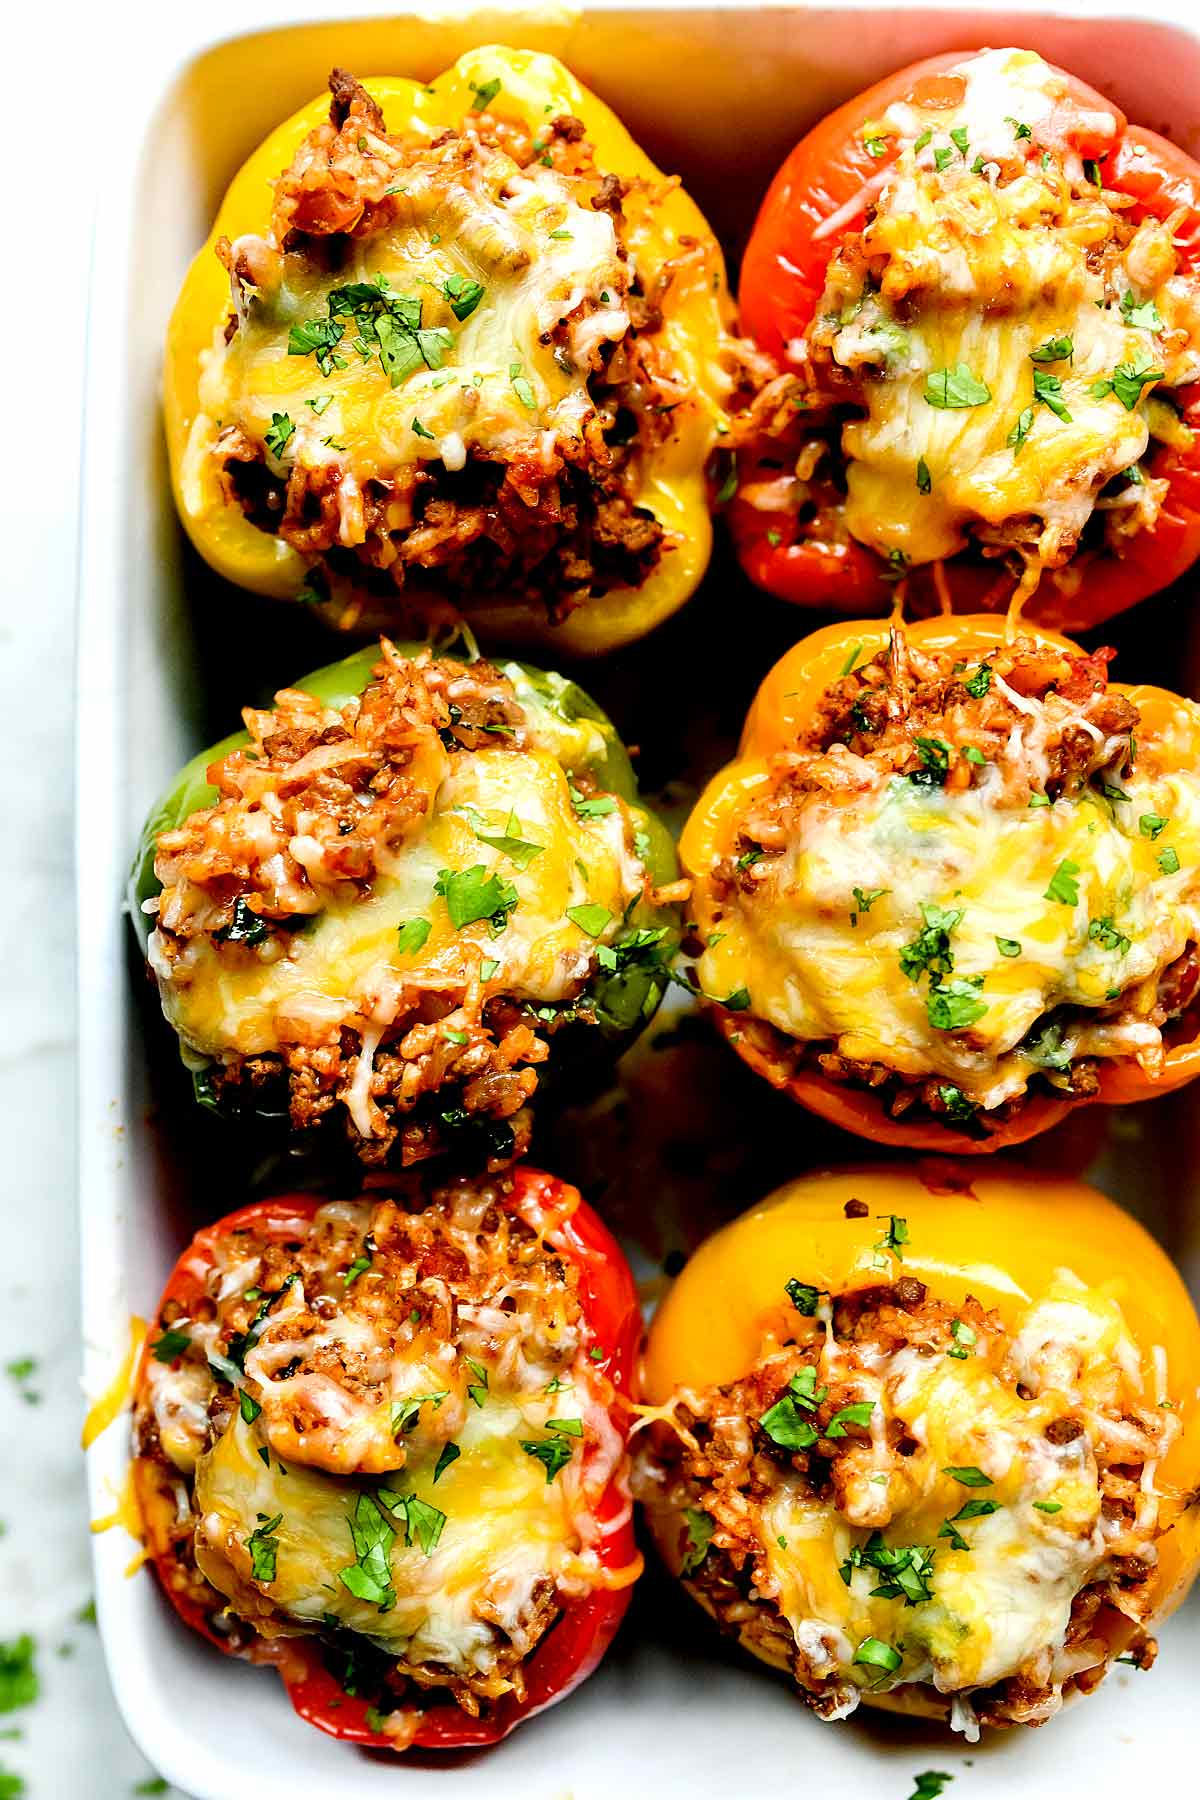 Poivrons mexicains farcis au fromage | foodiecrush.com #beef #poivrons #poivrons farcis #santé #facile #mexicain